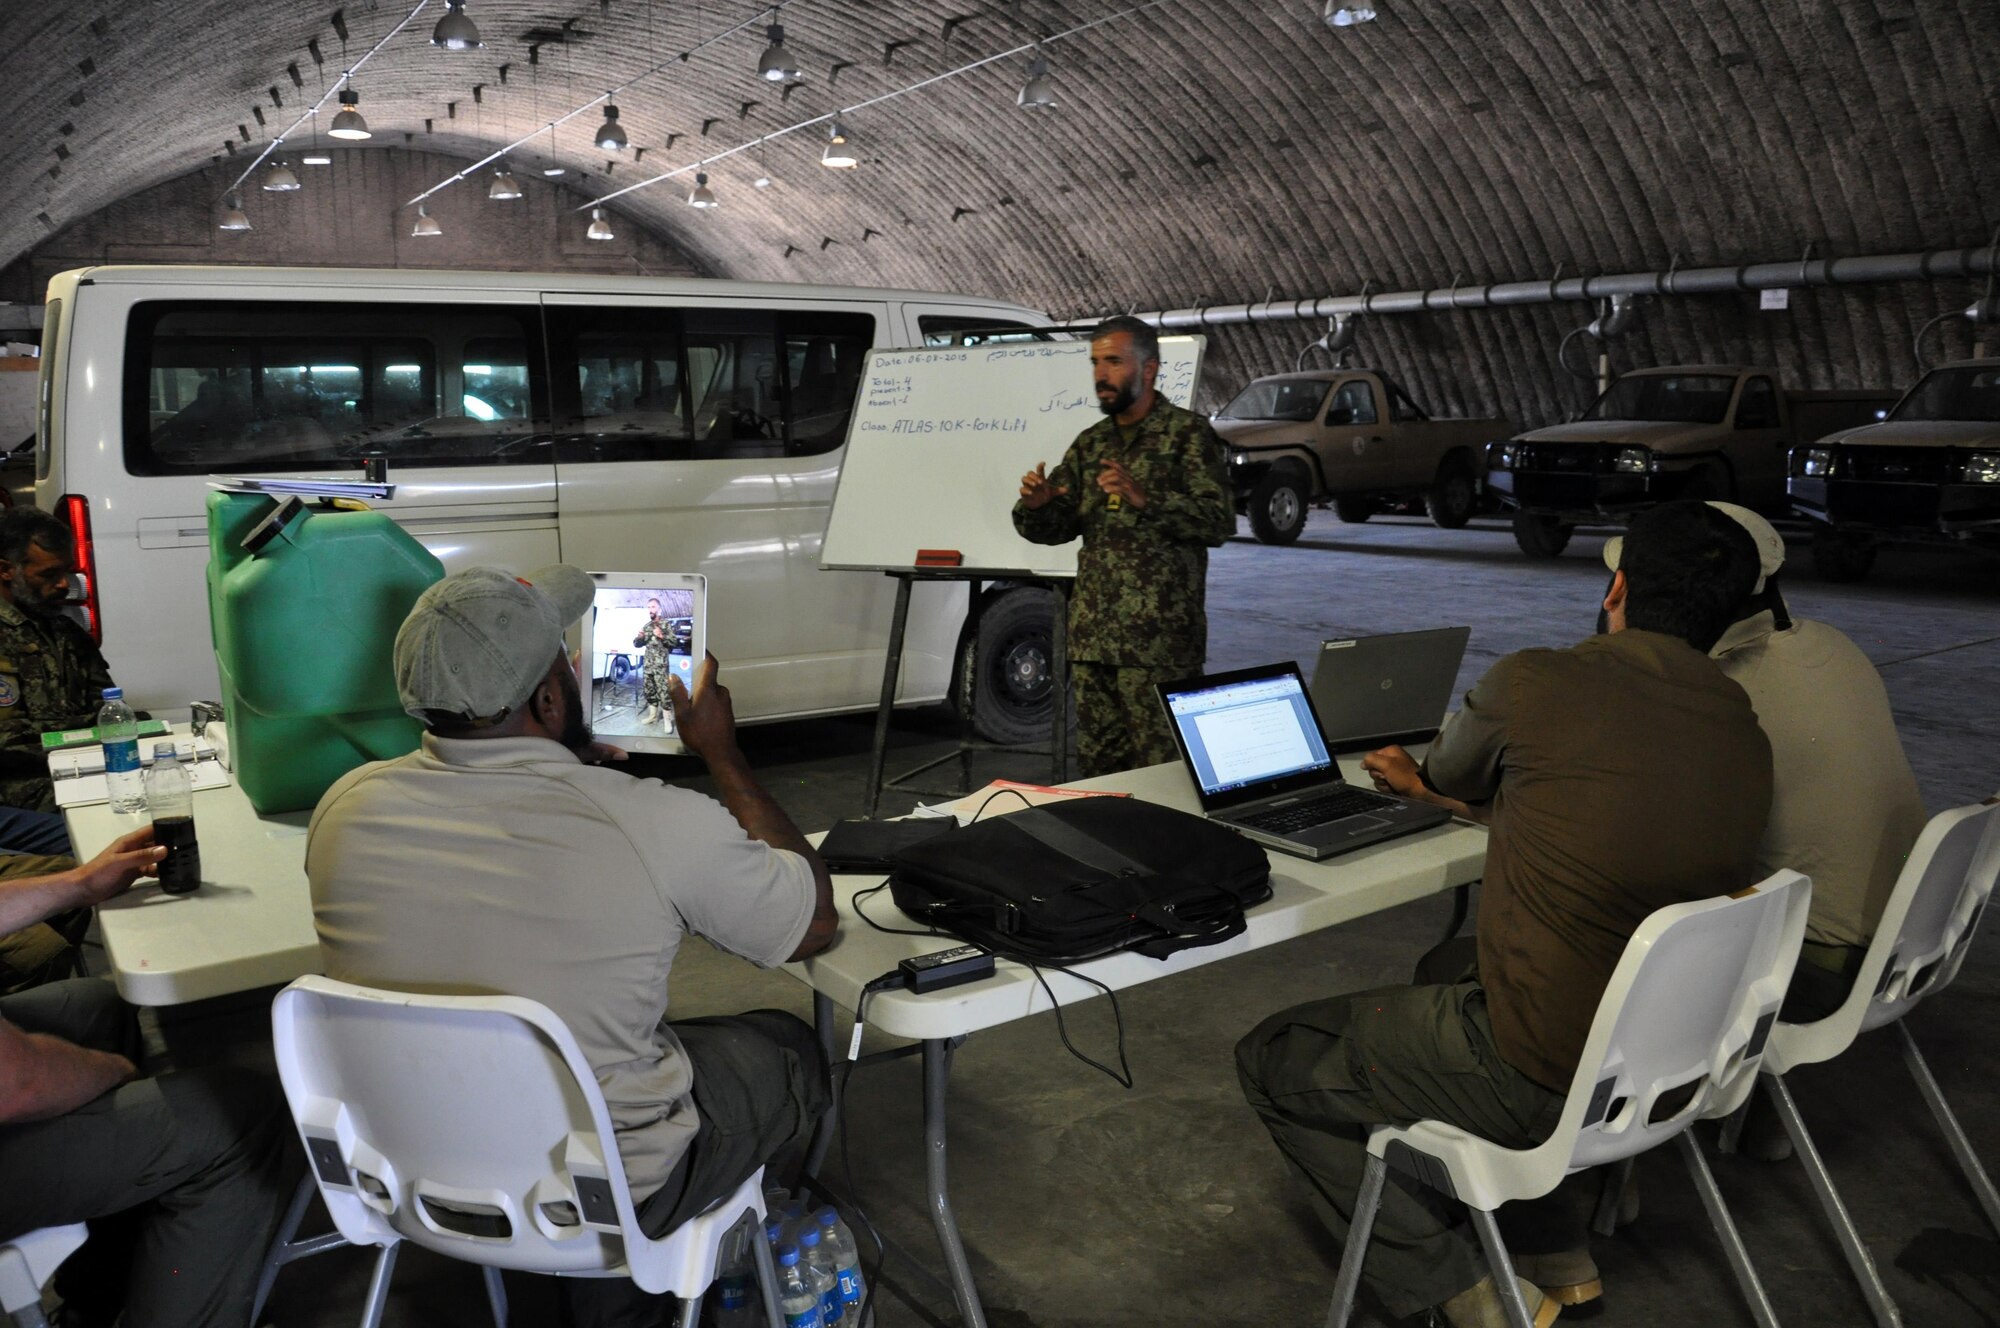 An Afghan National Army vehicle maintainers practices “teaching techniques” with contractors during an instructor certification session at Kabul Air Wing Aug. 6, 2015. Train, Advise, Assist Command – Air (TAAC-Air) advisors and contractors work to refine Afghan Air Force logistics, reduce new acquisitions and programs, and create a sustainable and capable air force to support the Afghan National Security Forces in the coming years. The Vehicle Maintenance Training Program (VMTP) is one focus area to acquire coalition expertise to provide meaningful instruction on specialized equipment and contractor support to the AAF. They began training June 27, 2015. (U.S. Air Force courtesy photo/Released)